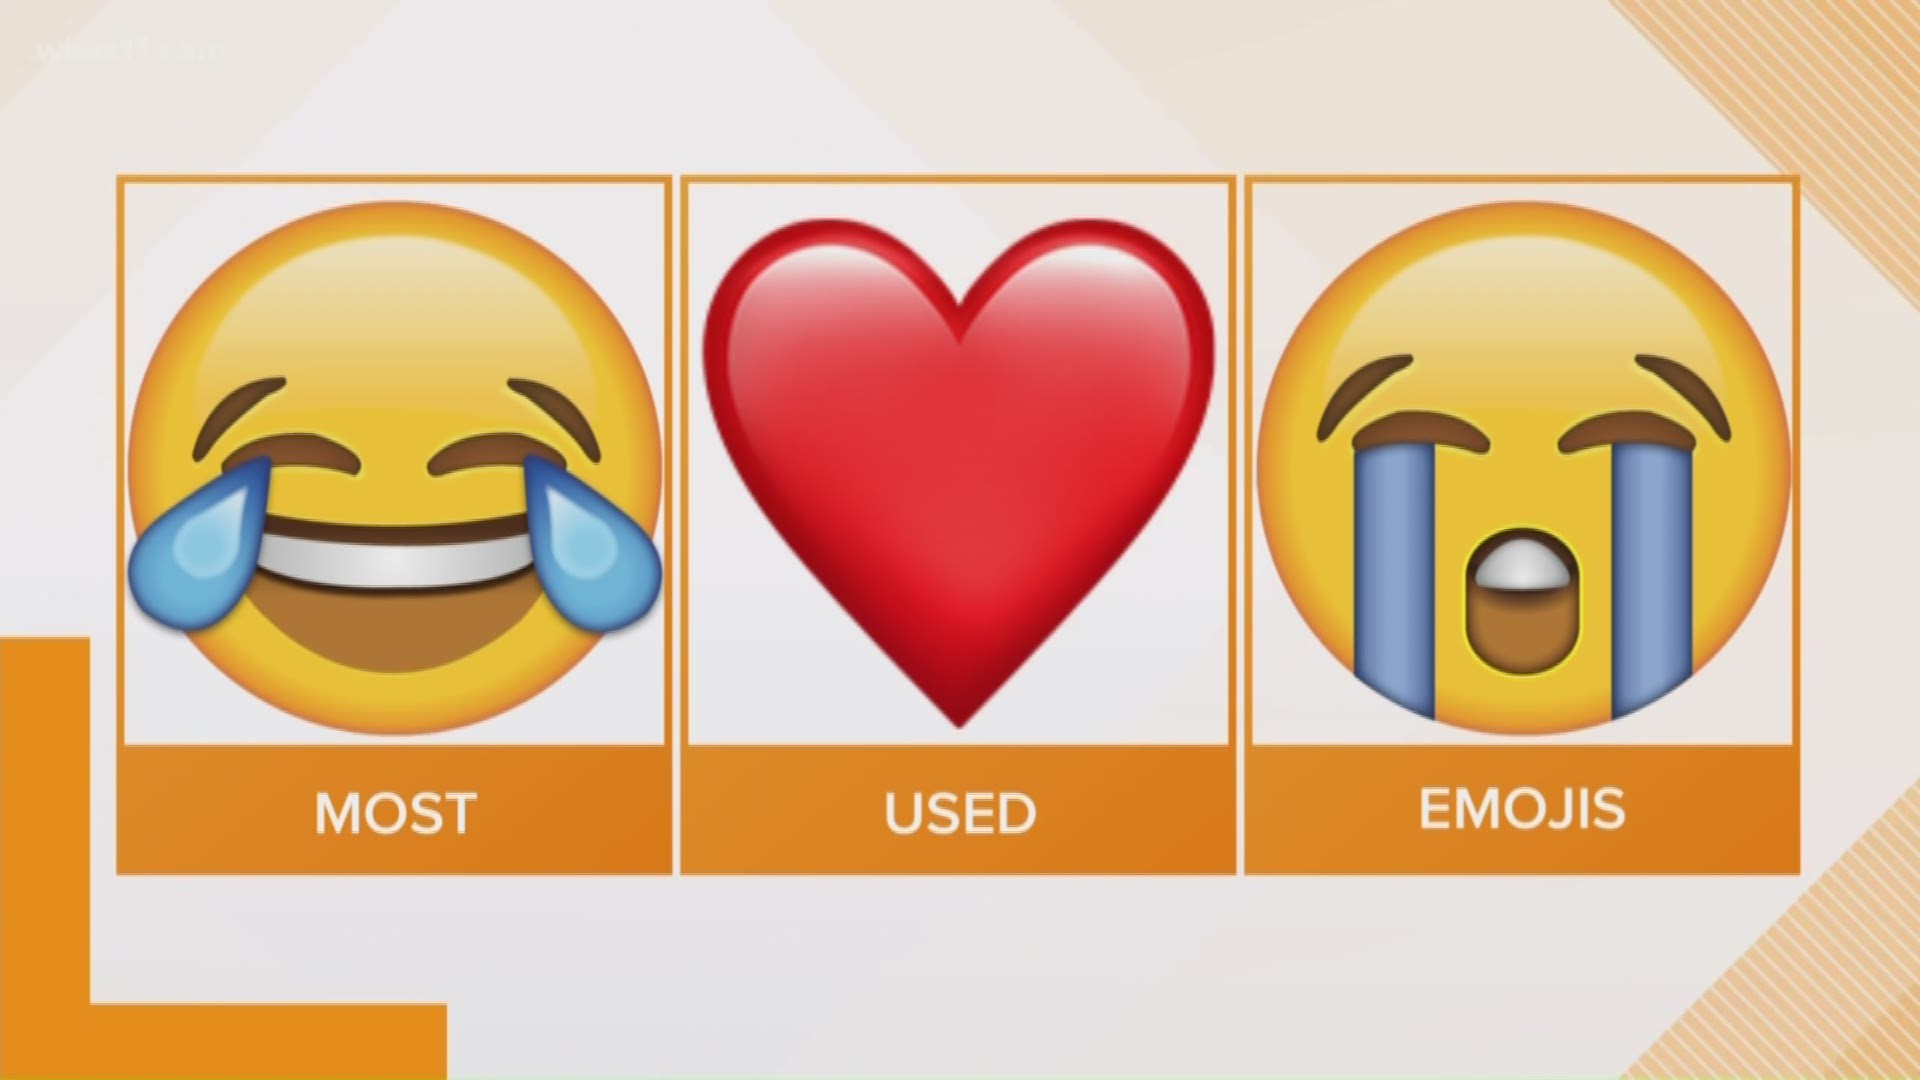 Let's talk about emojis: We use a LOT of them, and some are more fun to use than others. The Wake Up fam talks about some of their favorites.